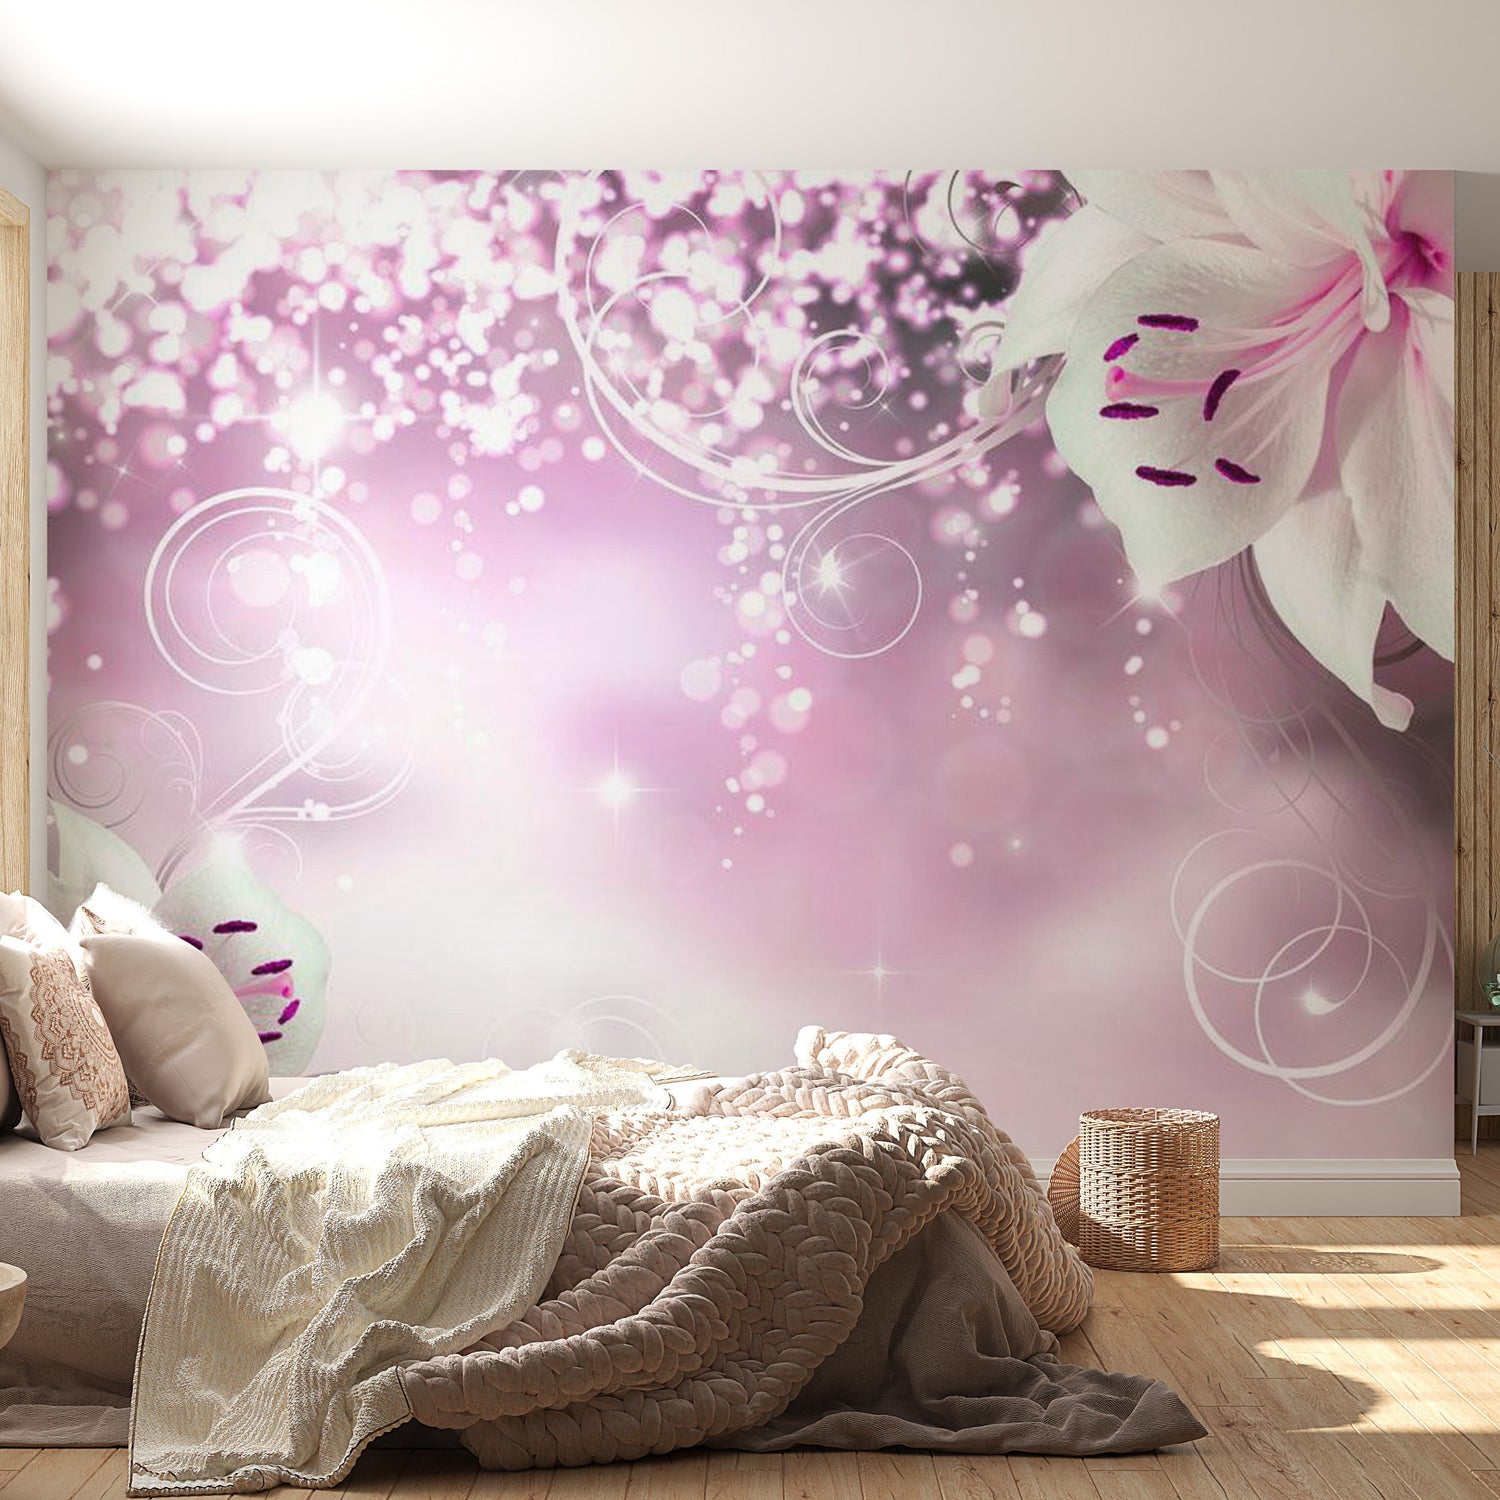 Peel & Stick Glam Wall Mural - Spell Of Lily - Removable Wall Decals